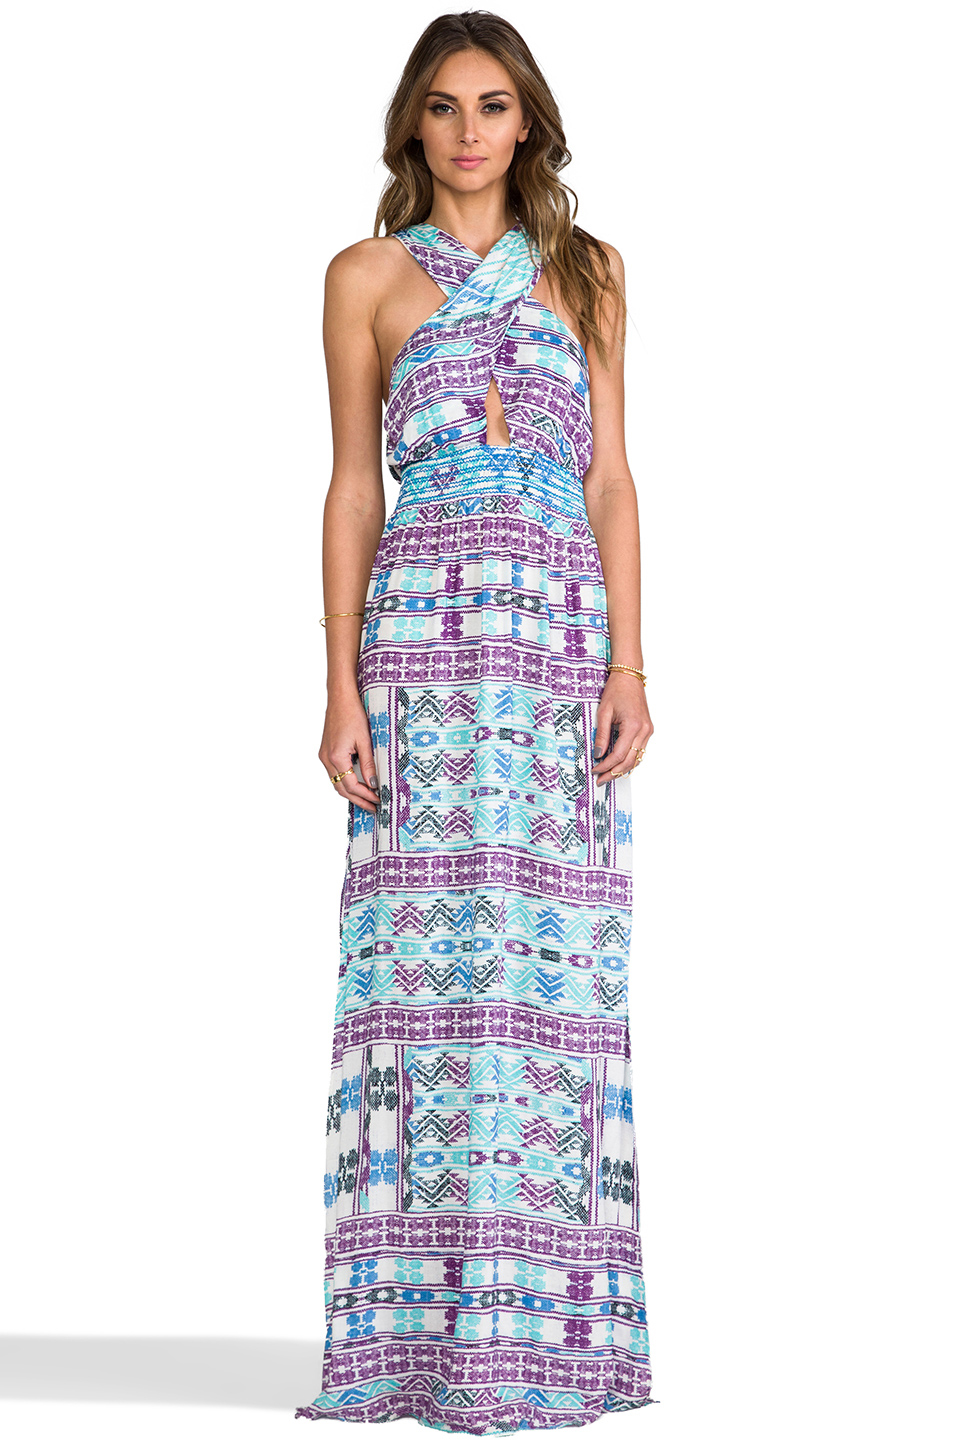 6 SHORE ROAD Drummer's Embroidered Maxi Dress in Purple